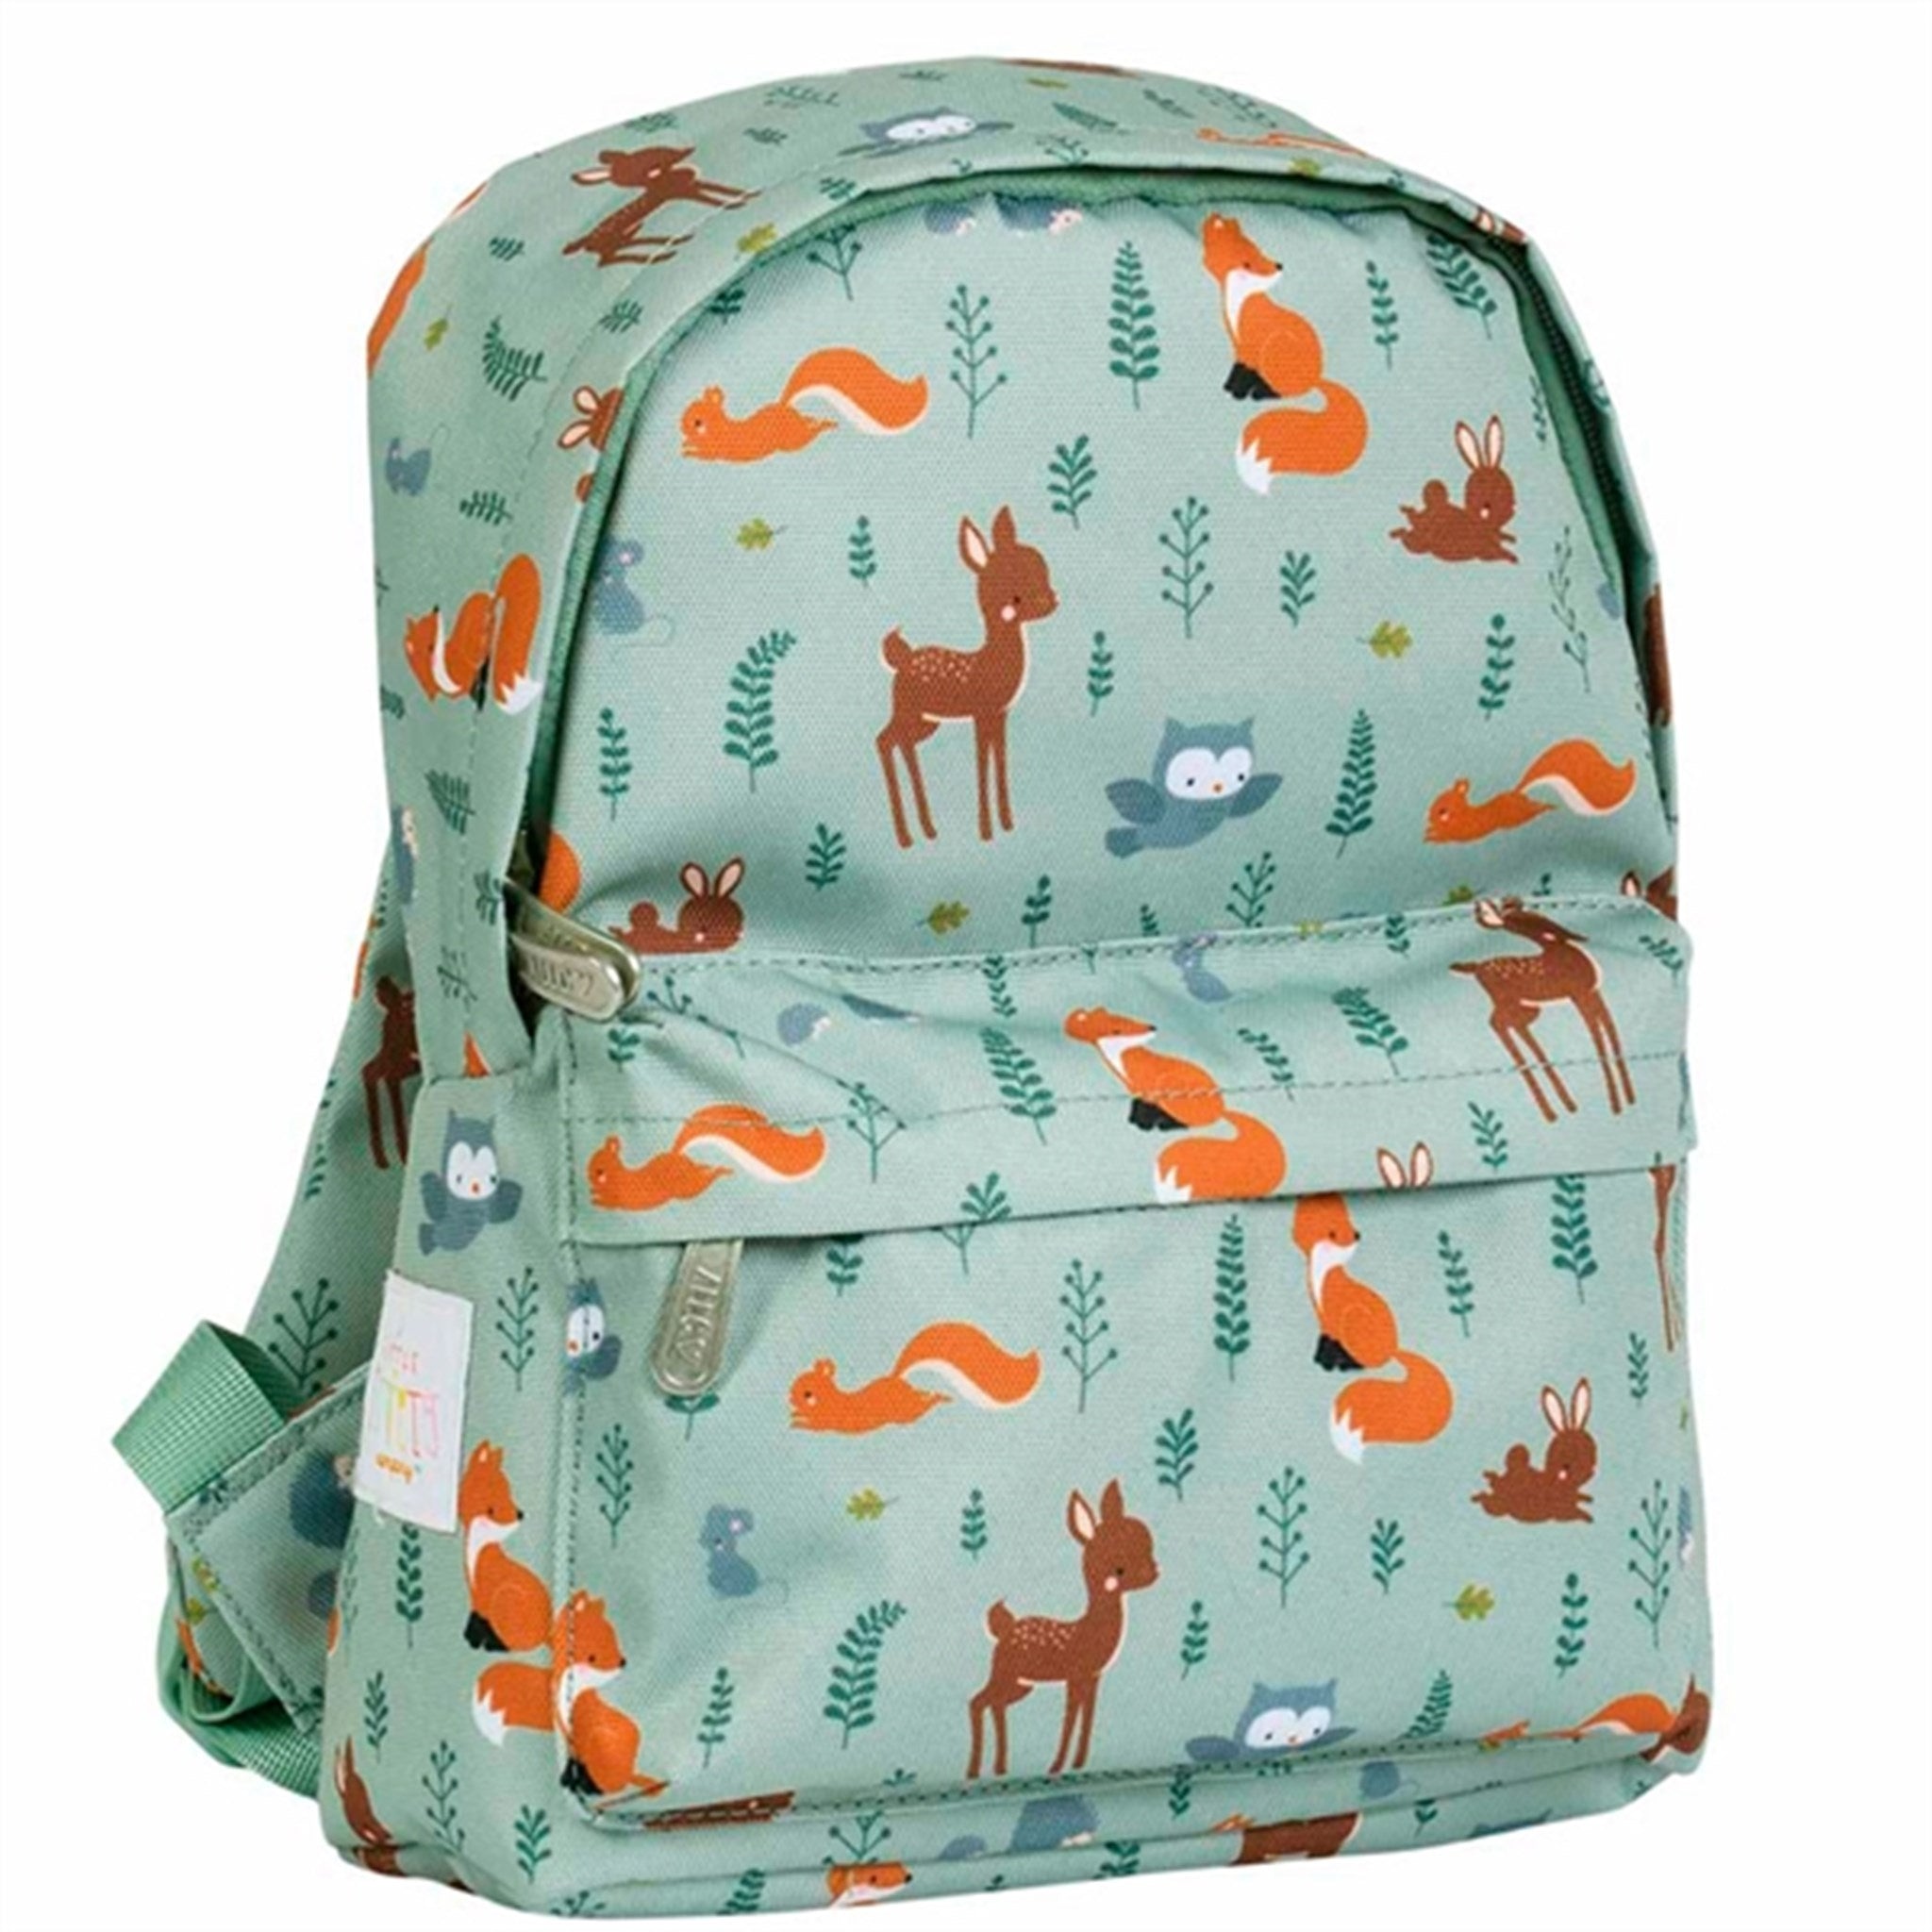 A Little Lovely Company Backpack Small Forest Friends